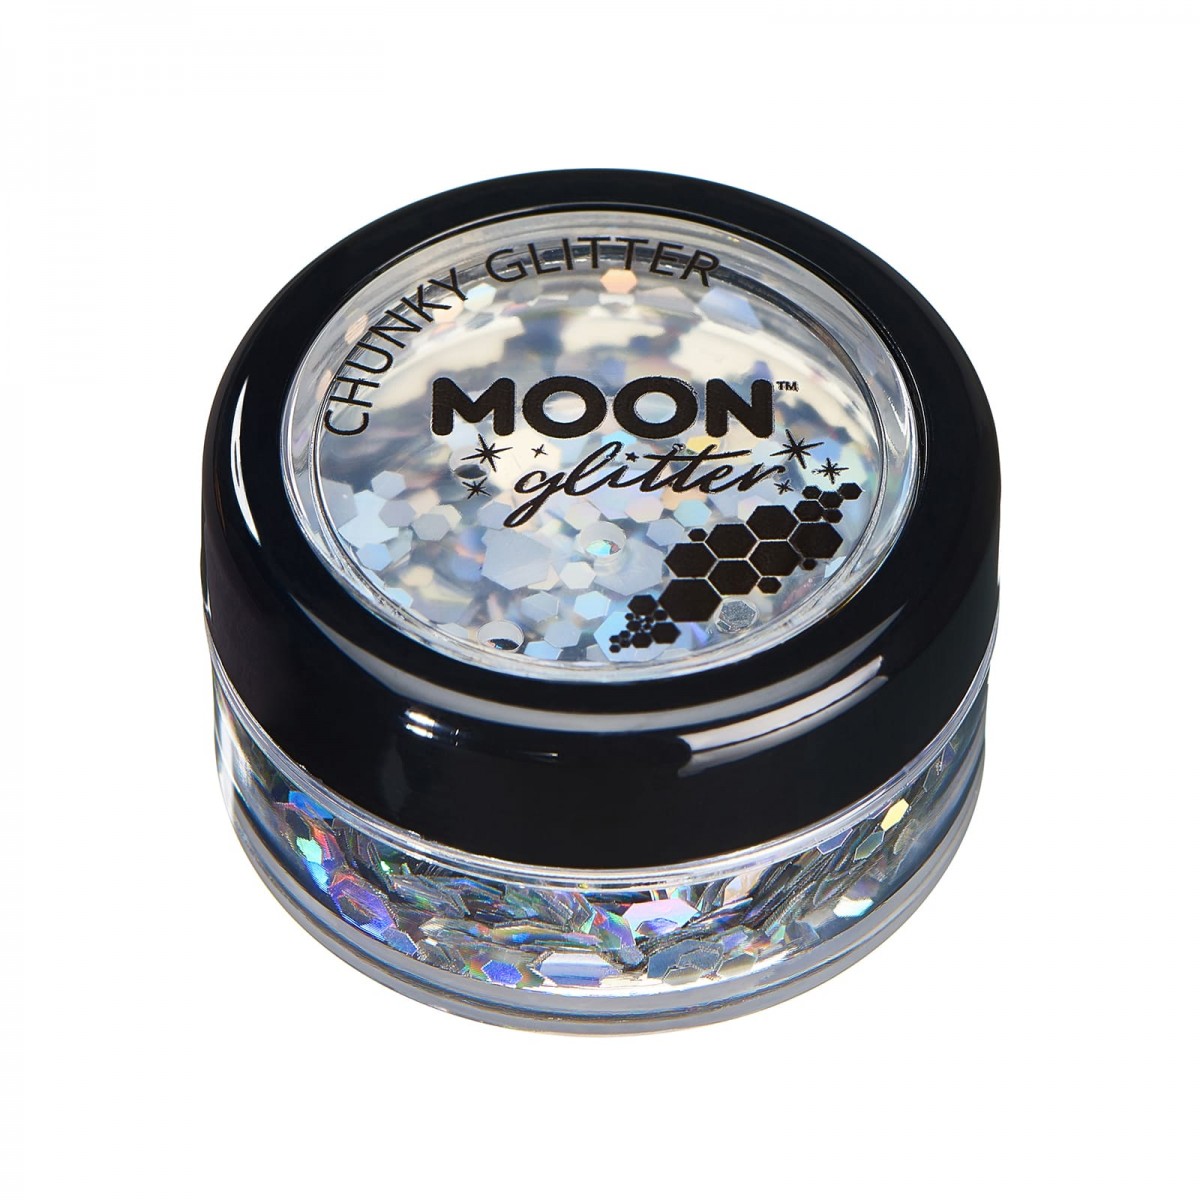 MOON CREATIONS G4 HOLOGRAPHIC CHUNKY GLITTER SILVER 3g